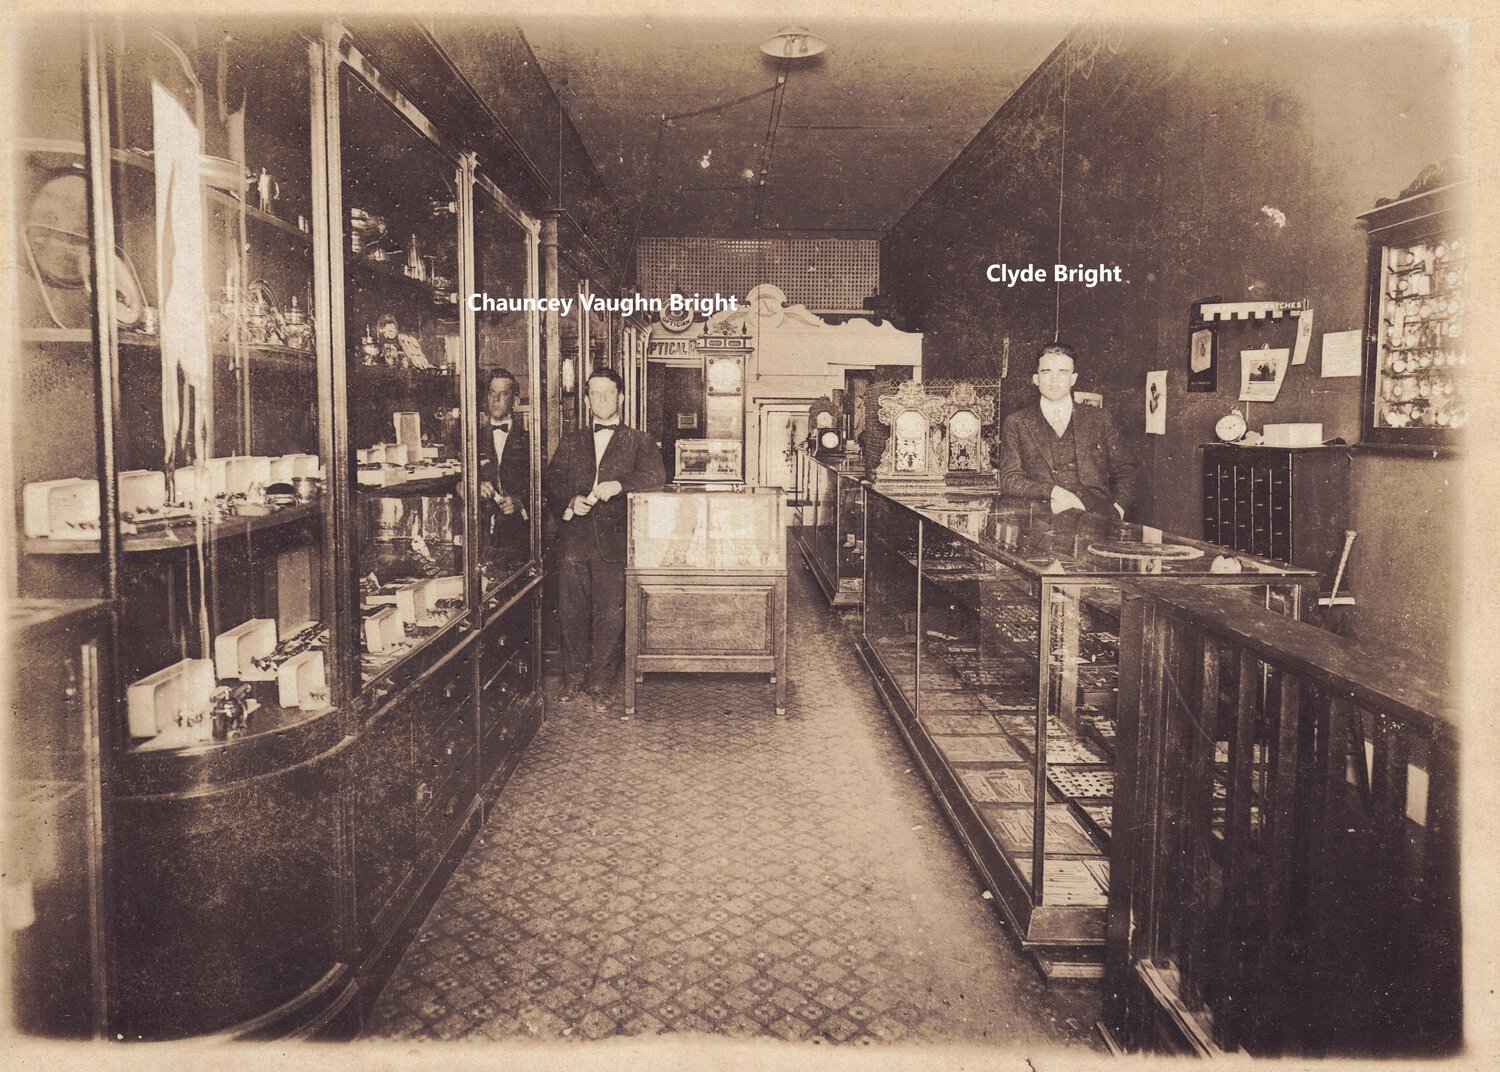 Storey Jewelry in 1903 with store founder Chauncey Vaughn Bright (left) and Clyde Bright (right).